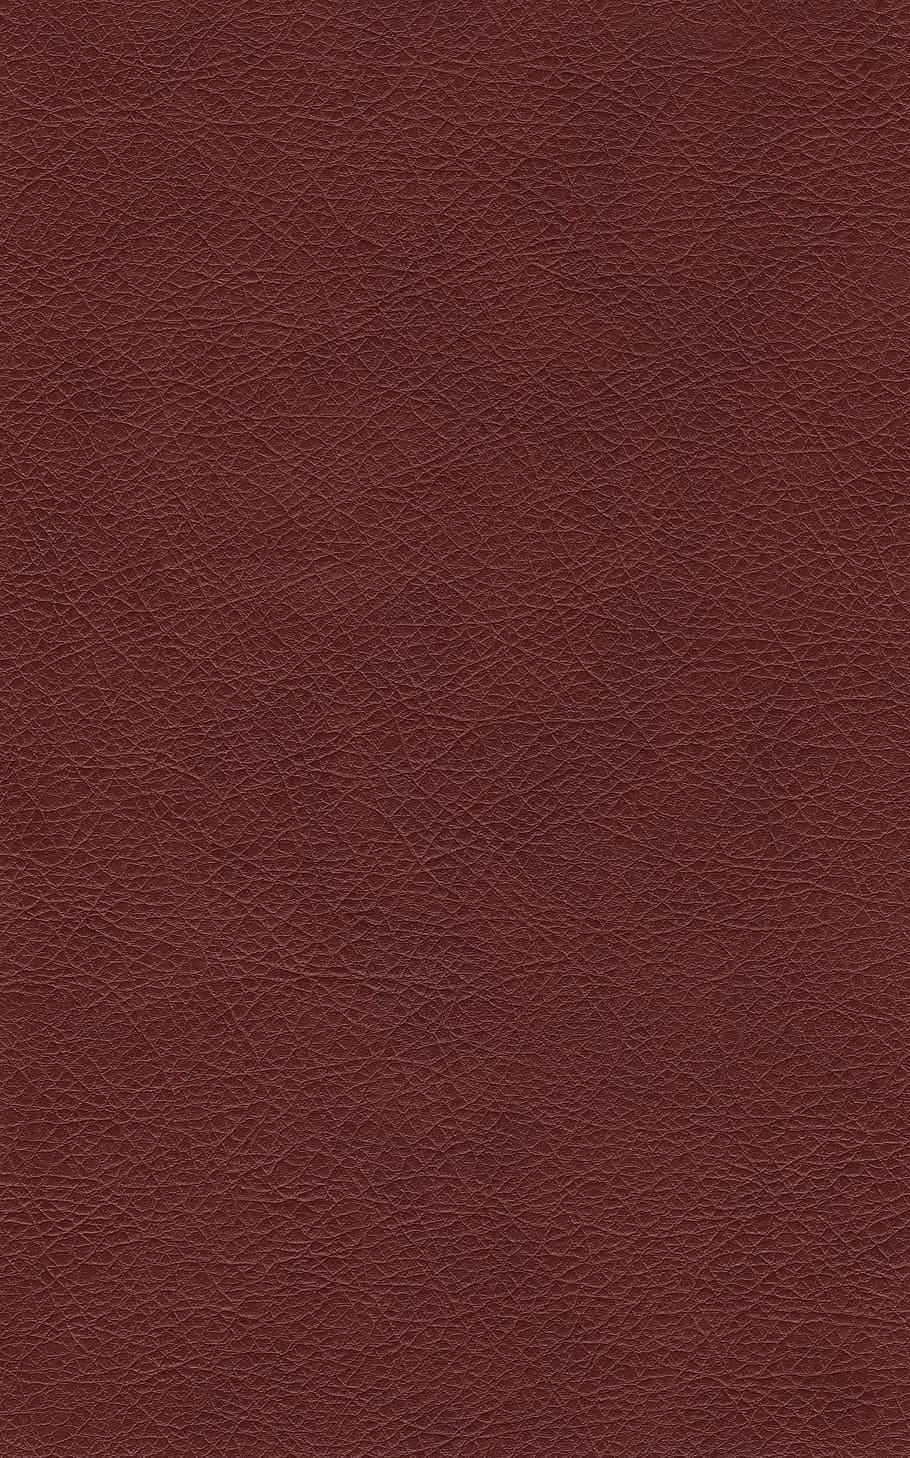 leather, textures, background, fabric, raw, decor, material, pattern, art, skin